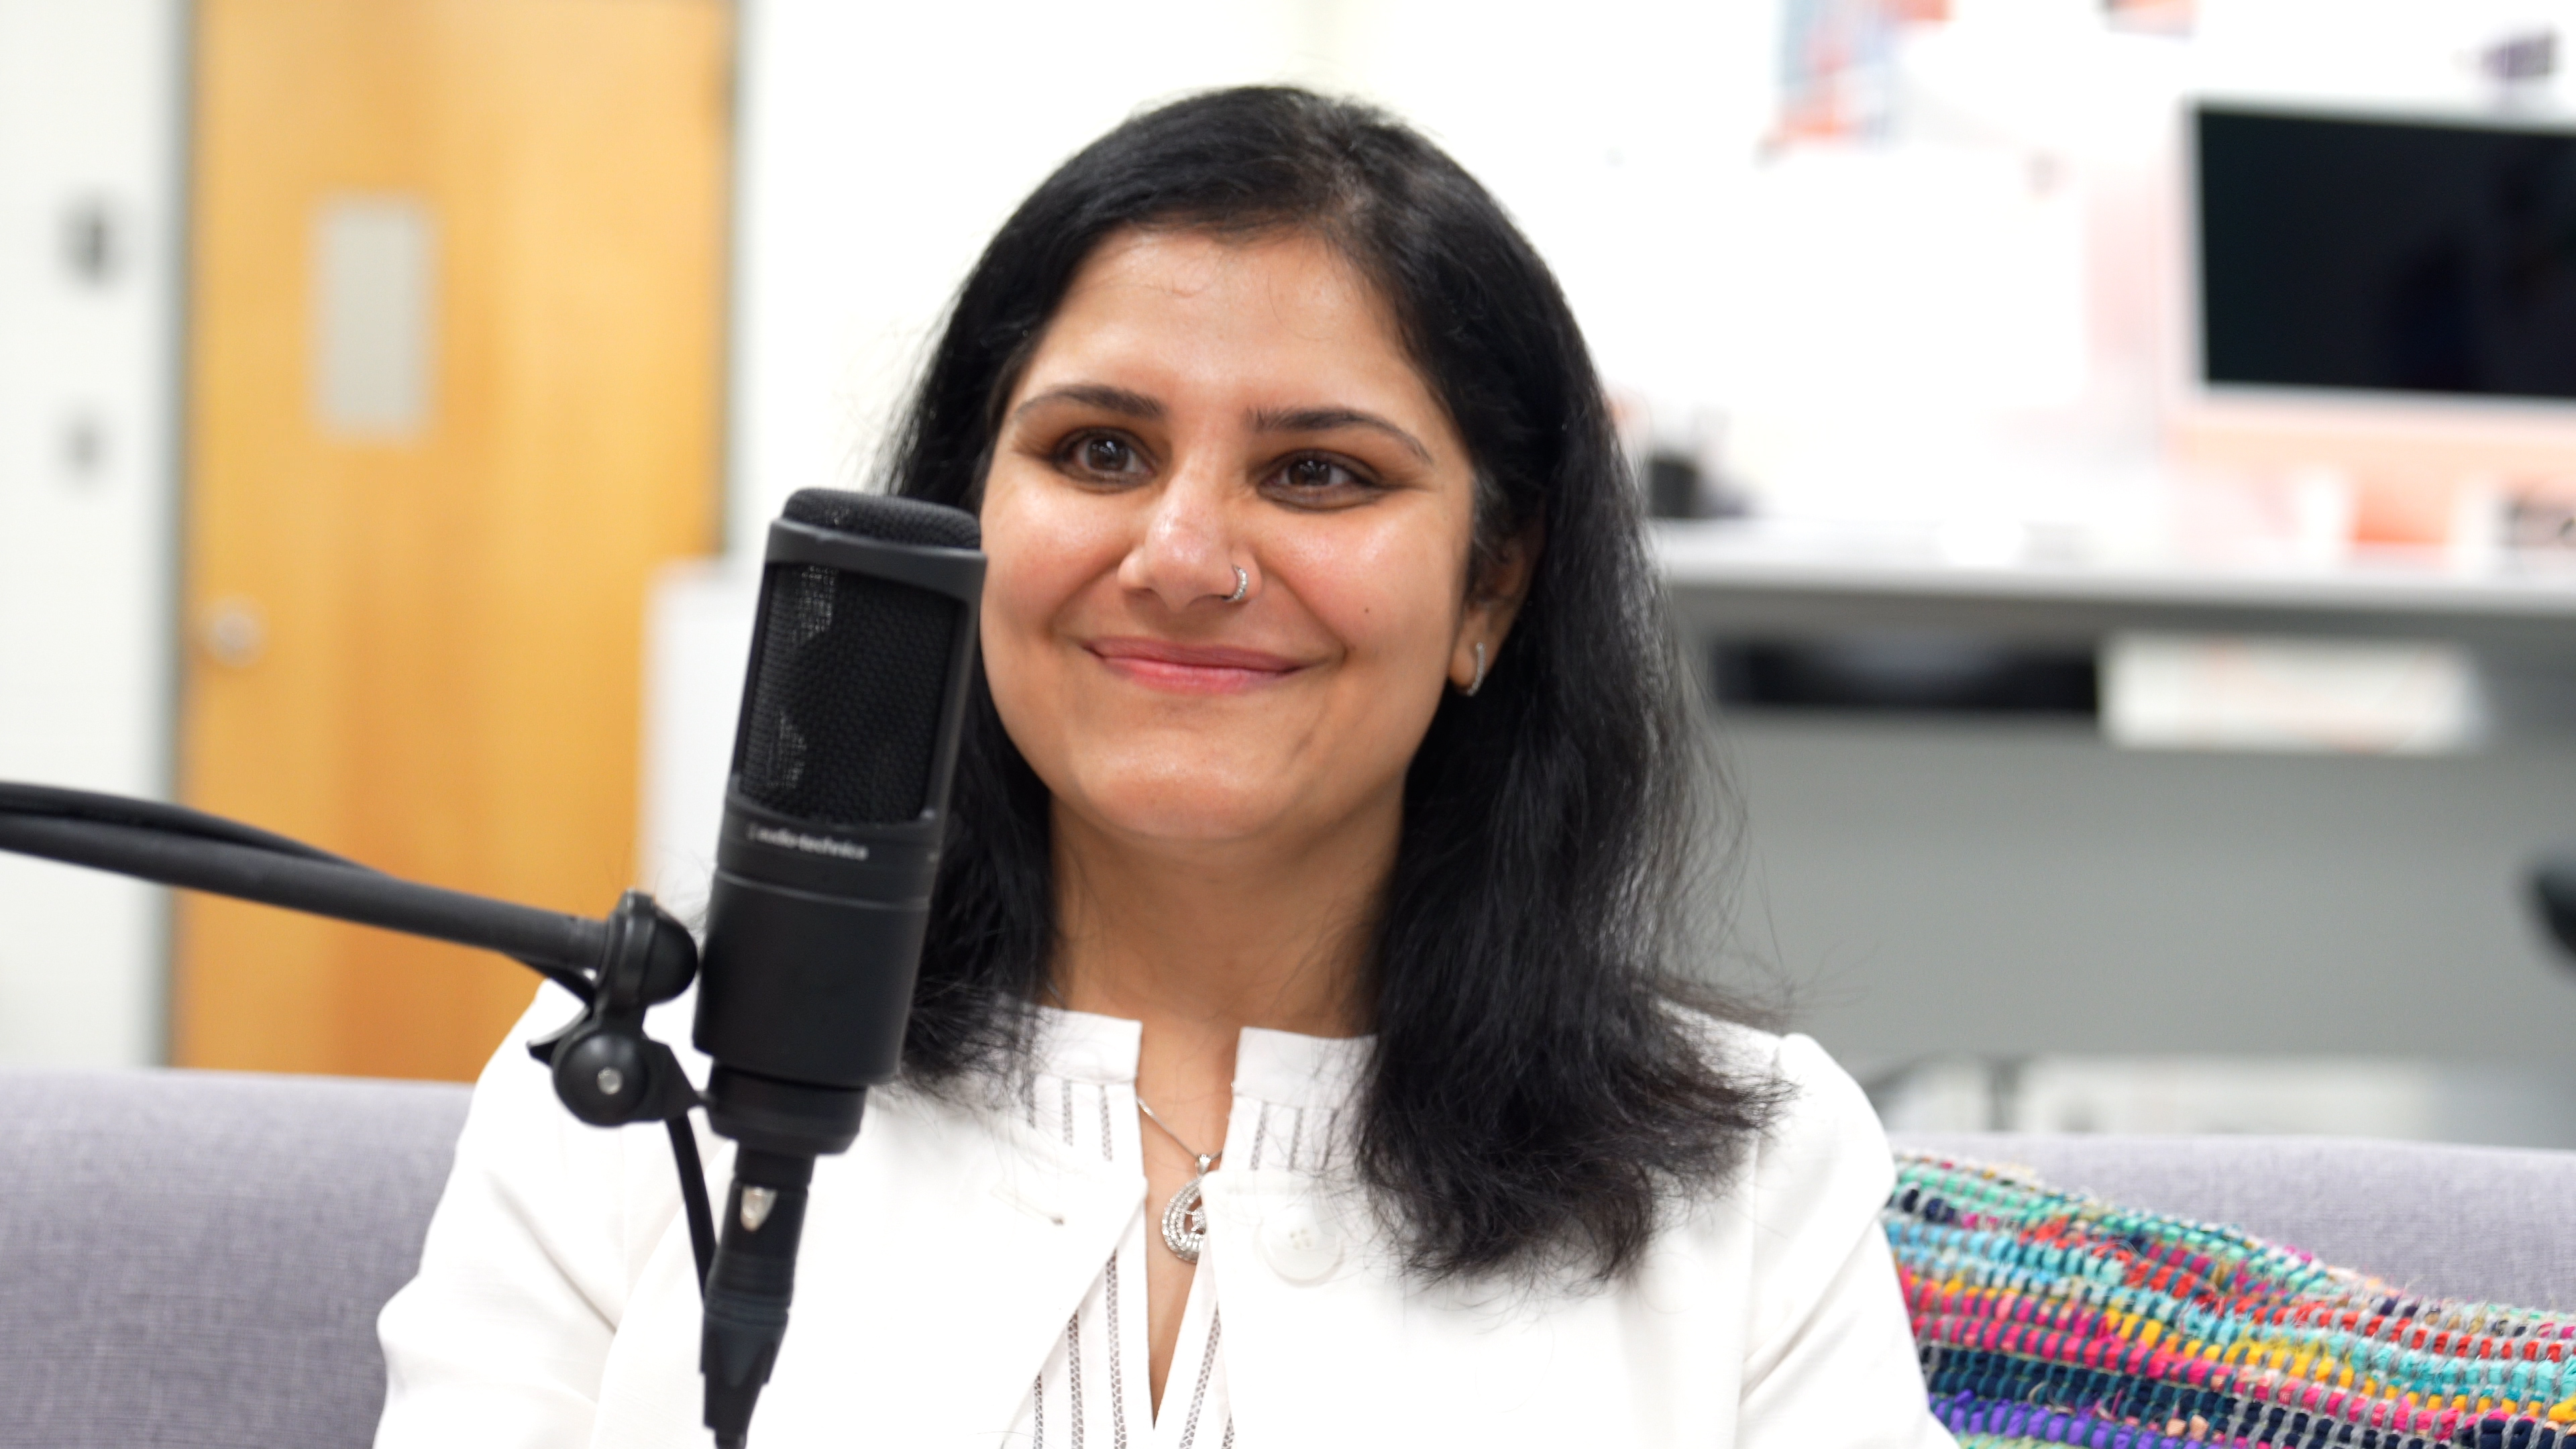 Dr. Gargi Sawhney sits behind a microphone while recording a podcast